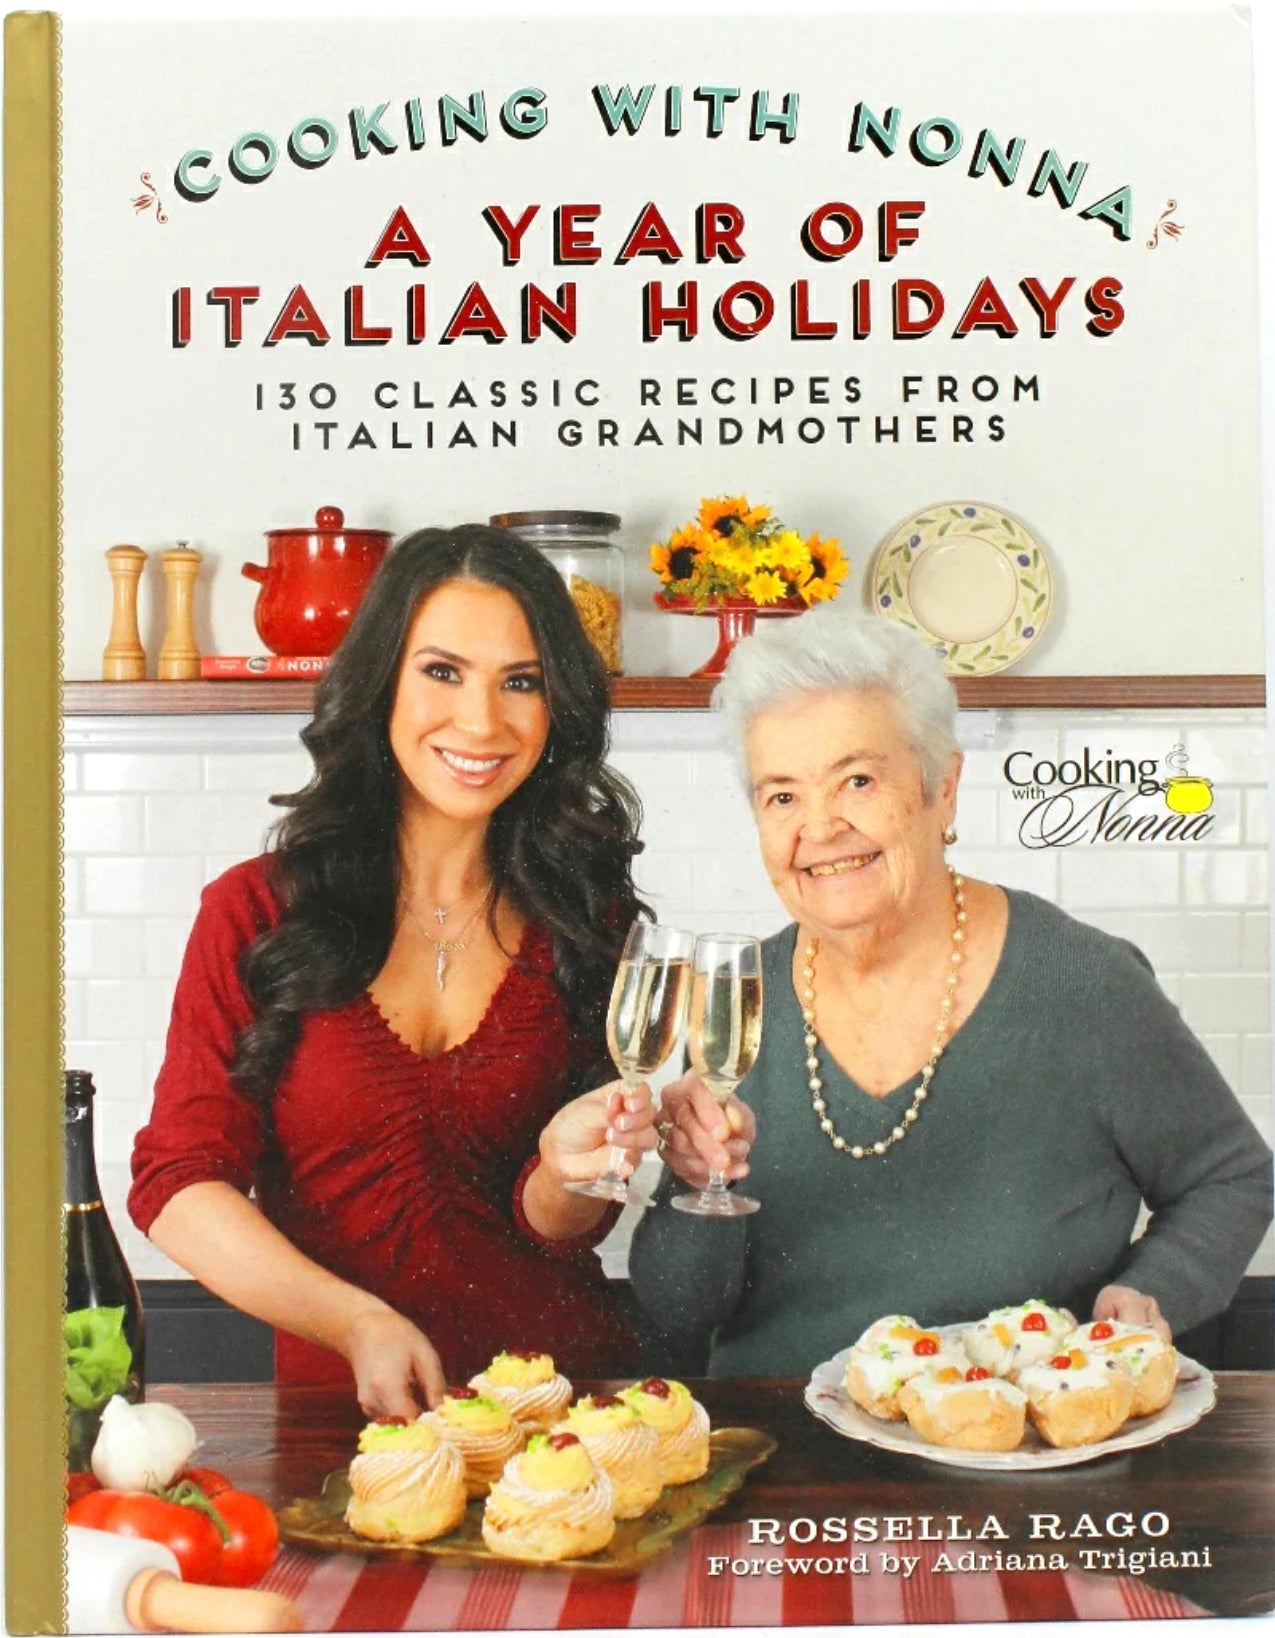 The Cooking With Nonna Cookbooks